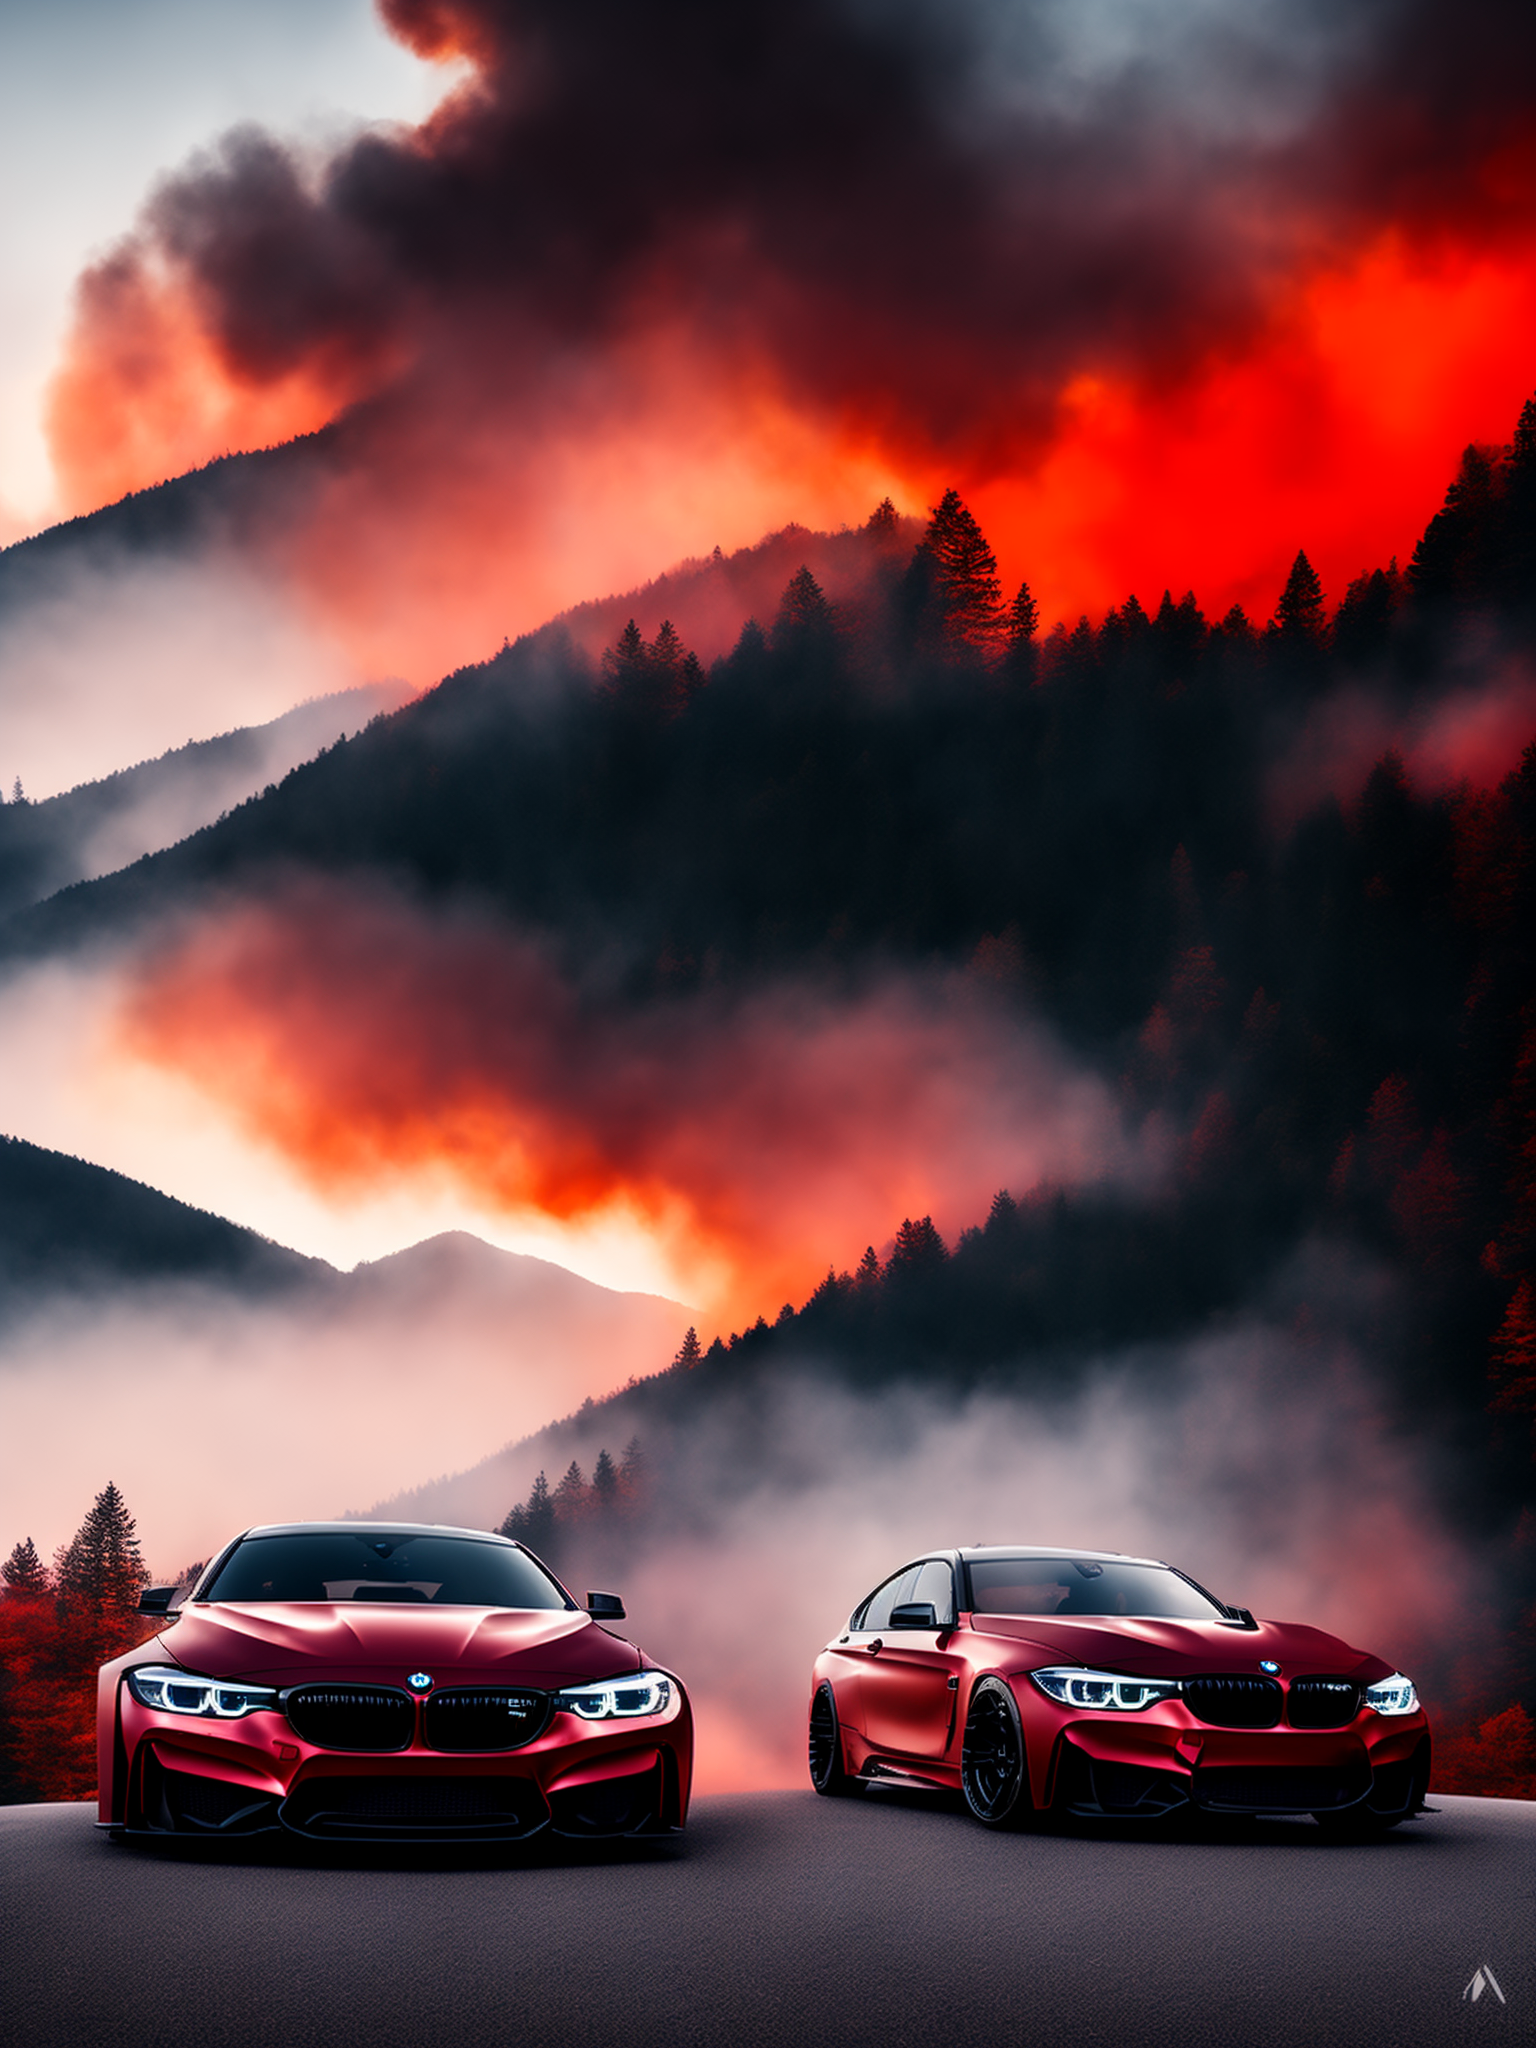 cryptowise: black BMW f11 M tuning in fall forest, mountains in